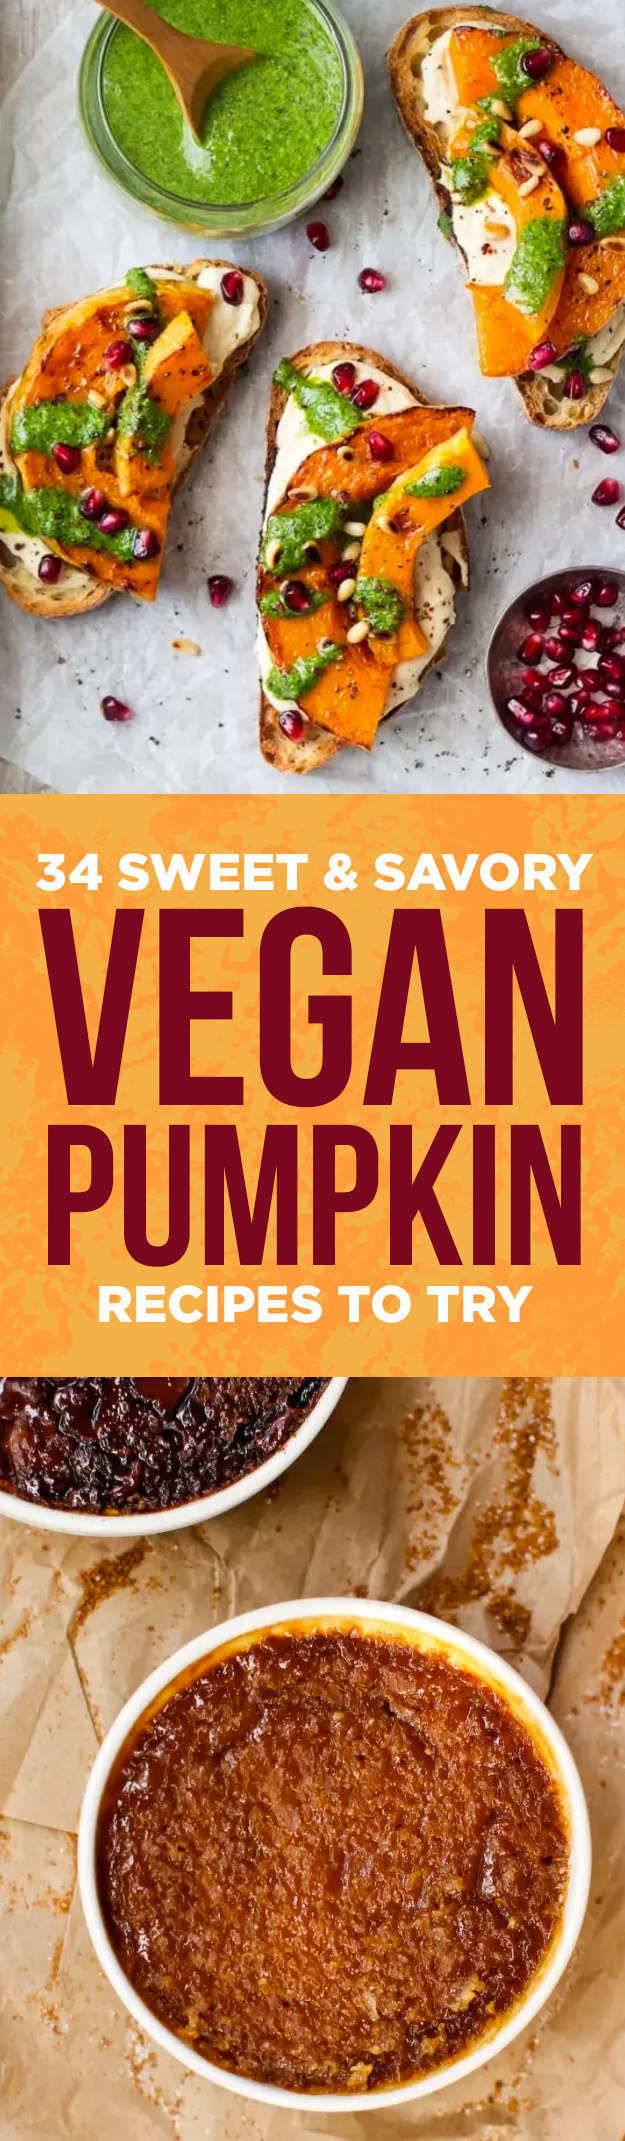 31 Sweet And Savory Vegan Pumpkin Recipes To Try